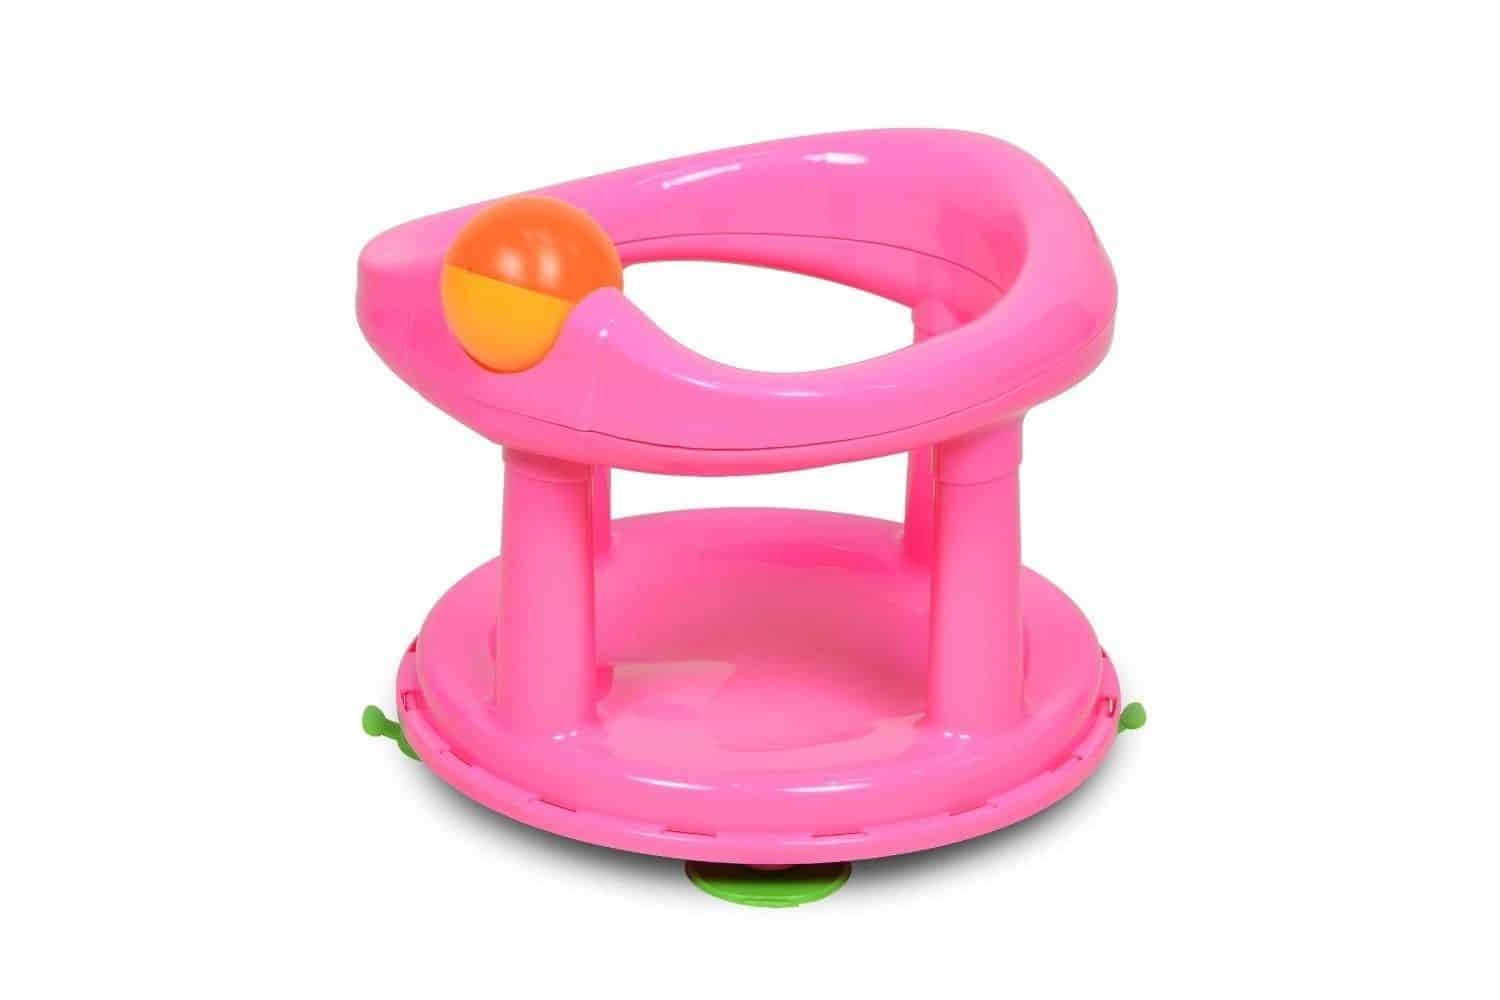 Safety 1st Pink 360 Degree Swivel Action Bath Seat